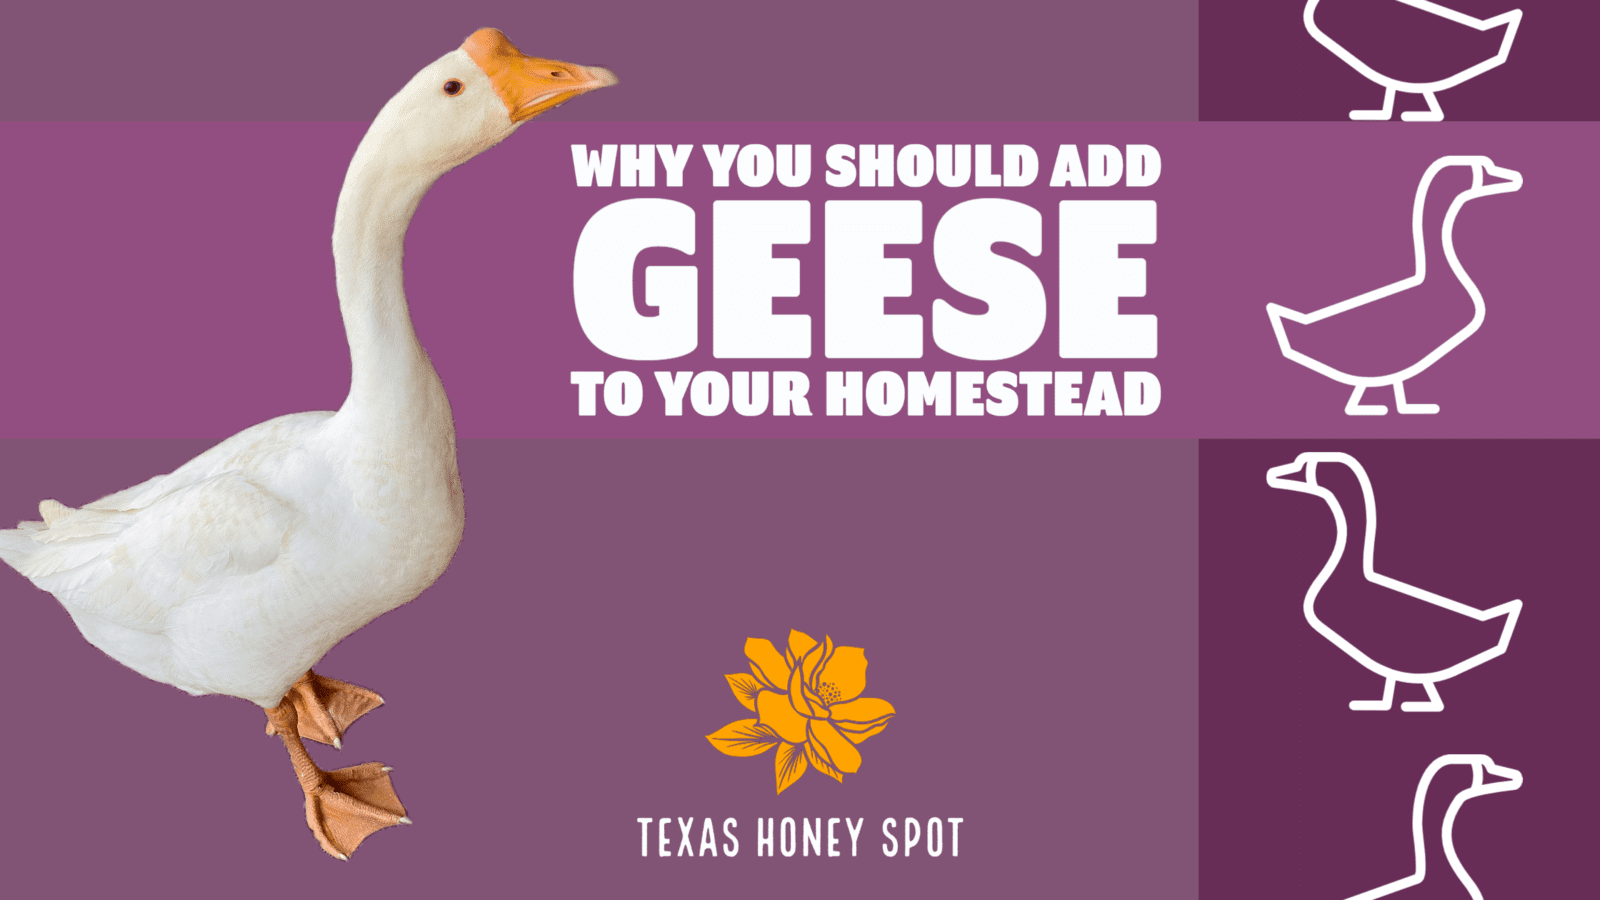 Need Help With Flock Protection? Why You Should Add Geese To Your Homestead